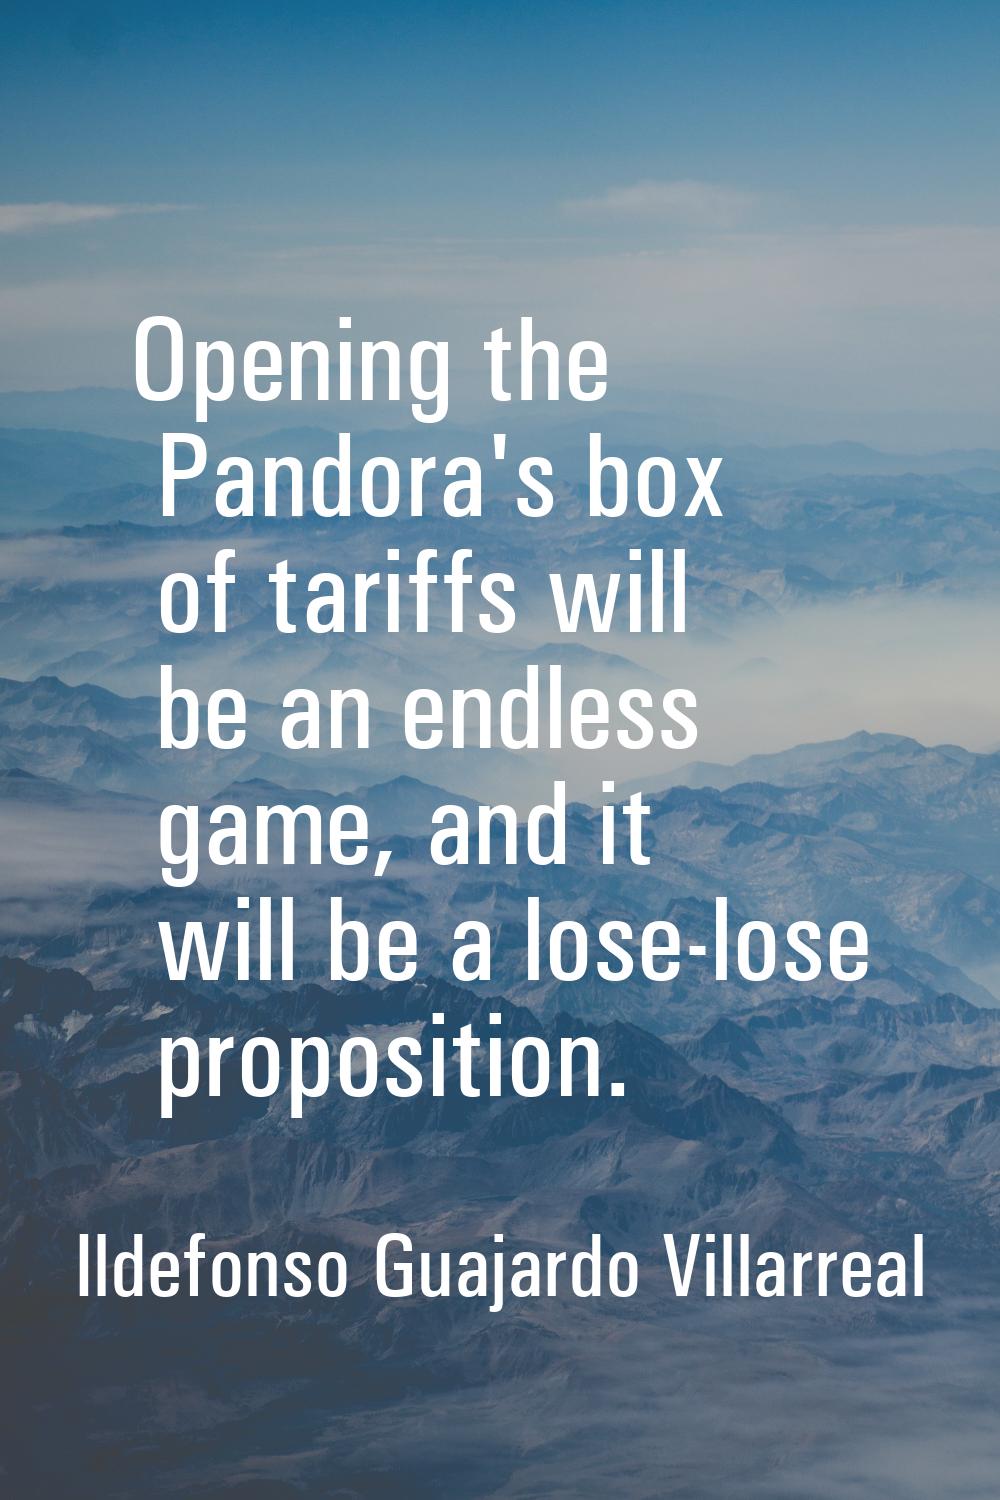 Opening the Pandora's box of tariffs will be an endless game, and it will be a lose-lose propositio